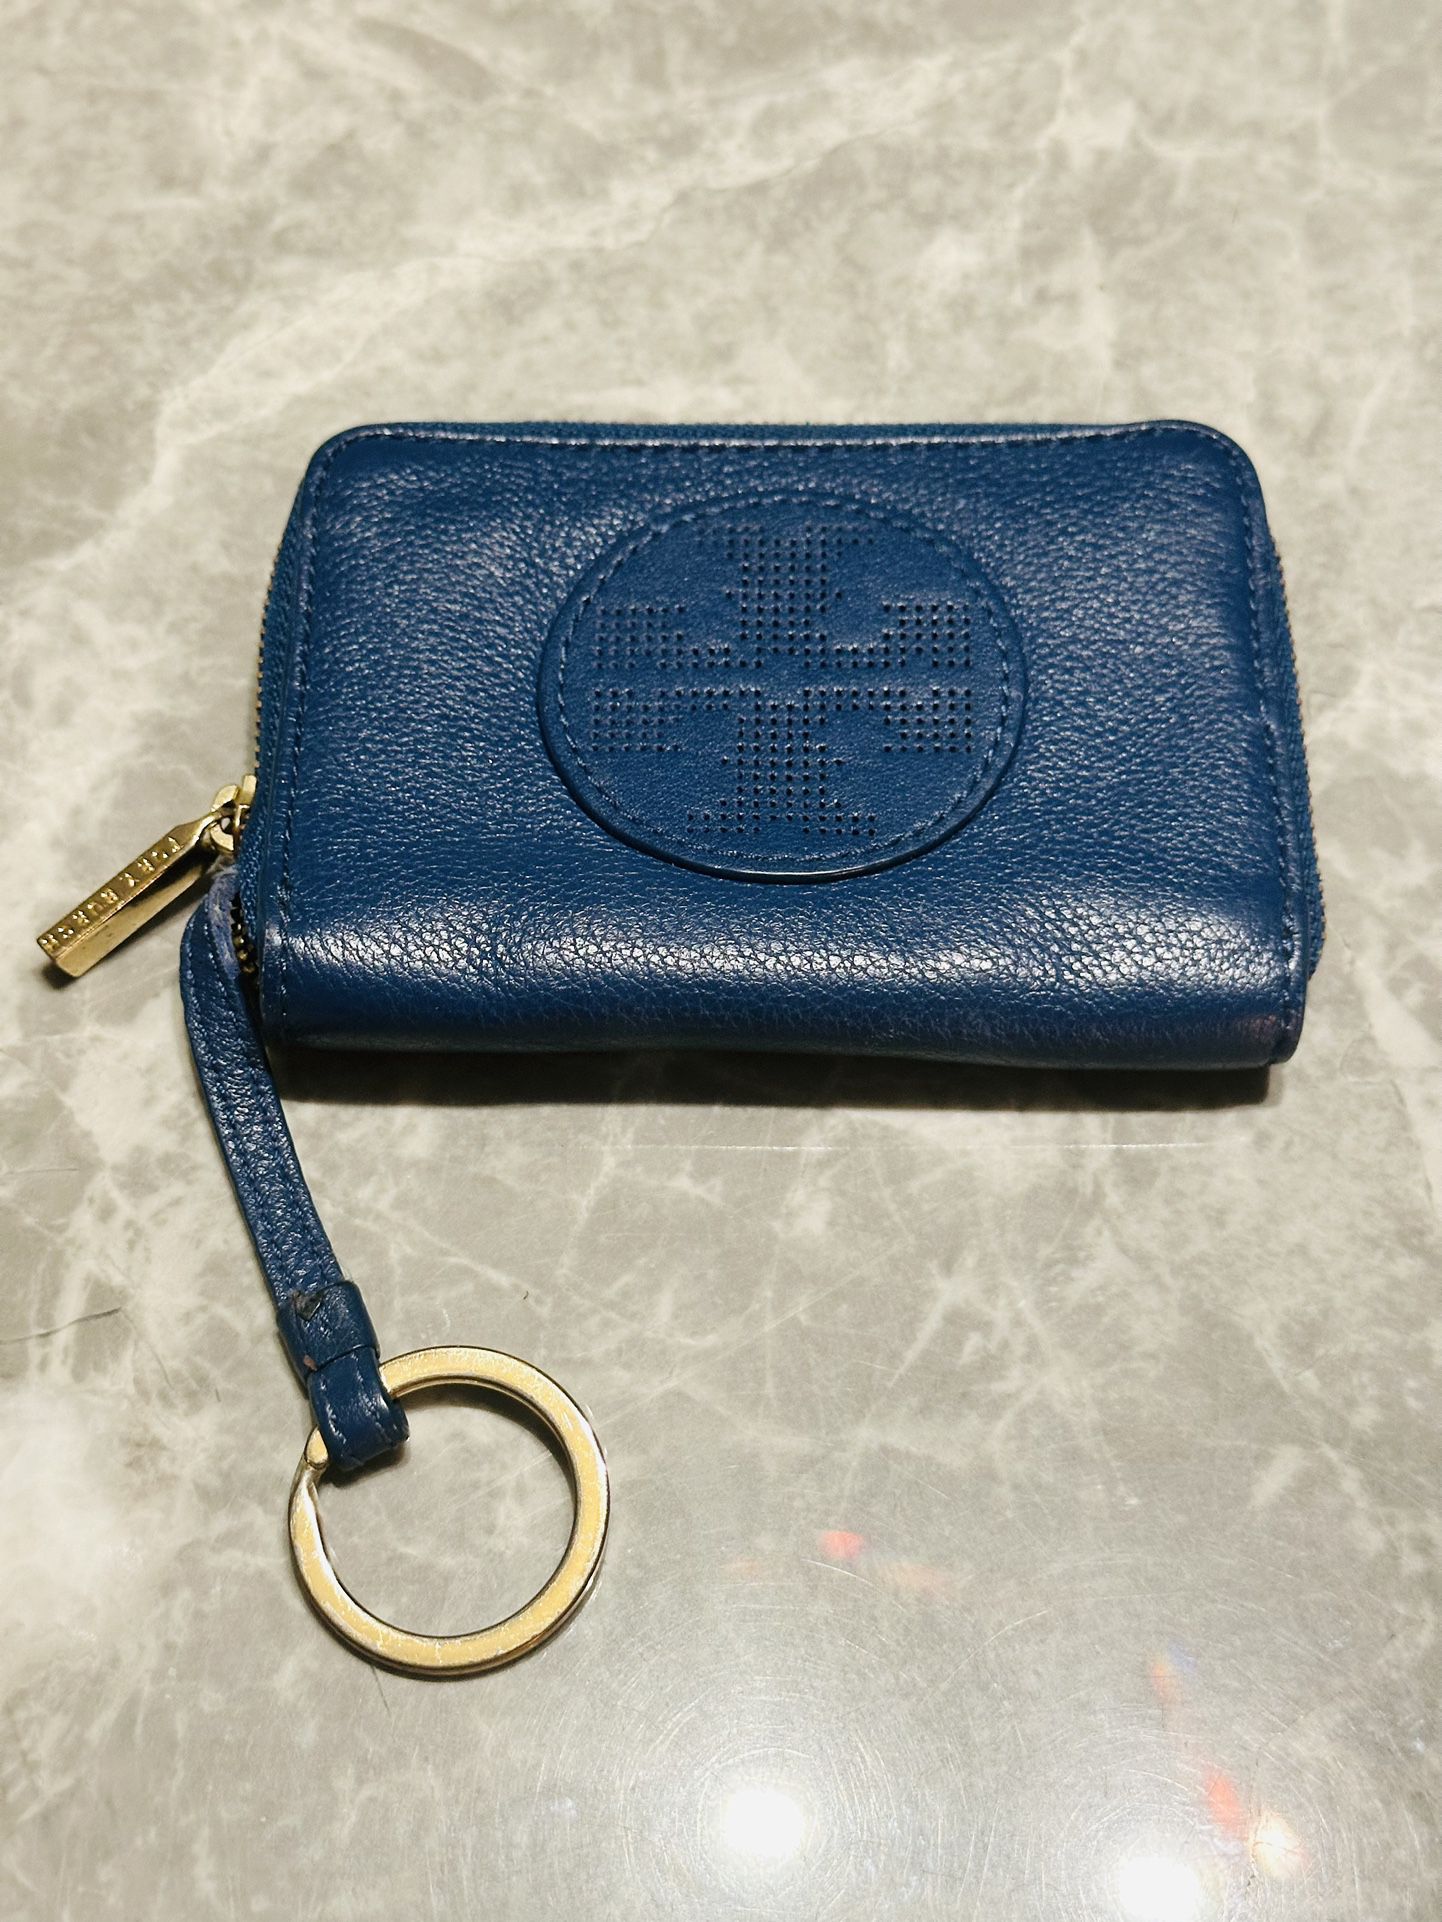 Tory Burch Mini Card Holder Key Chain Wallet Blue Pebbled Leather